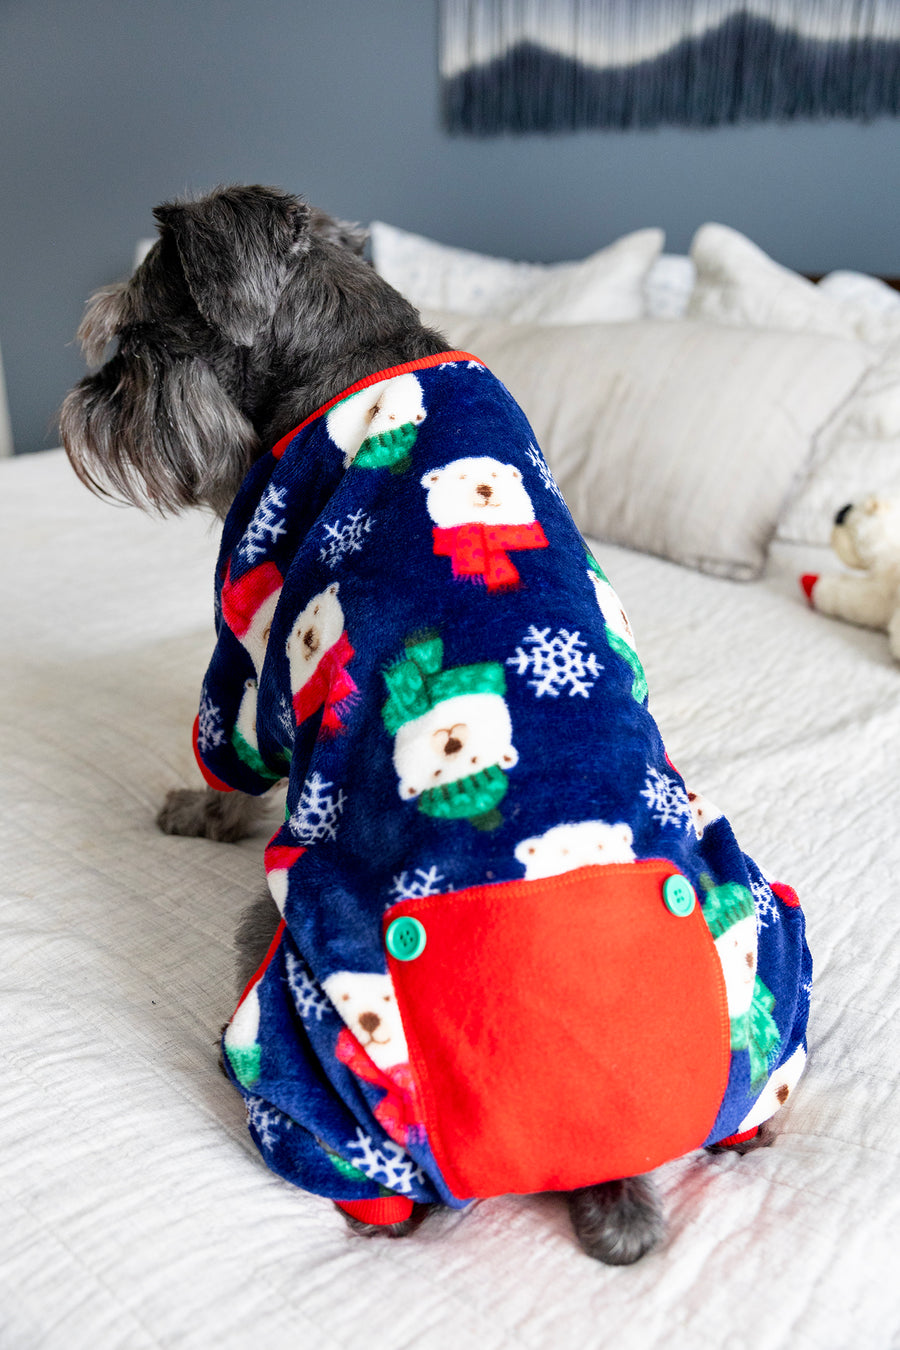 Cute Dog Pajamas in Blue for the Holidays